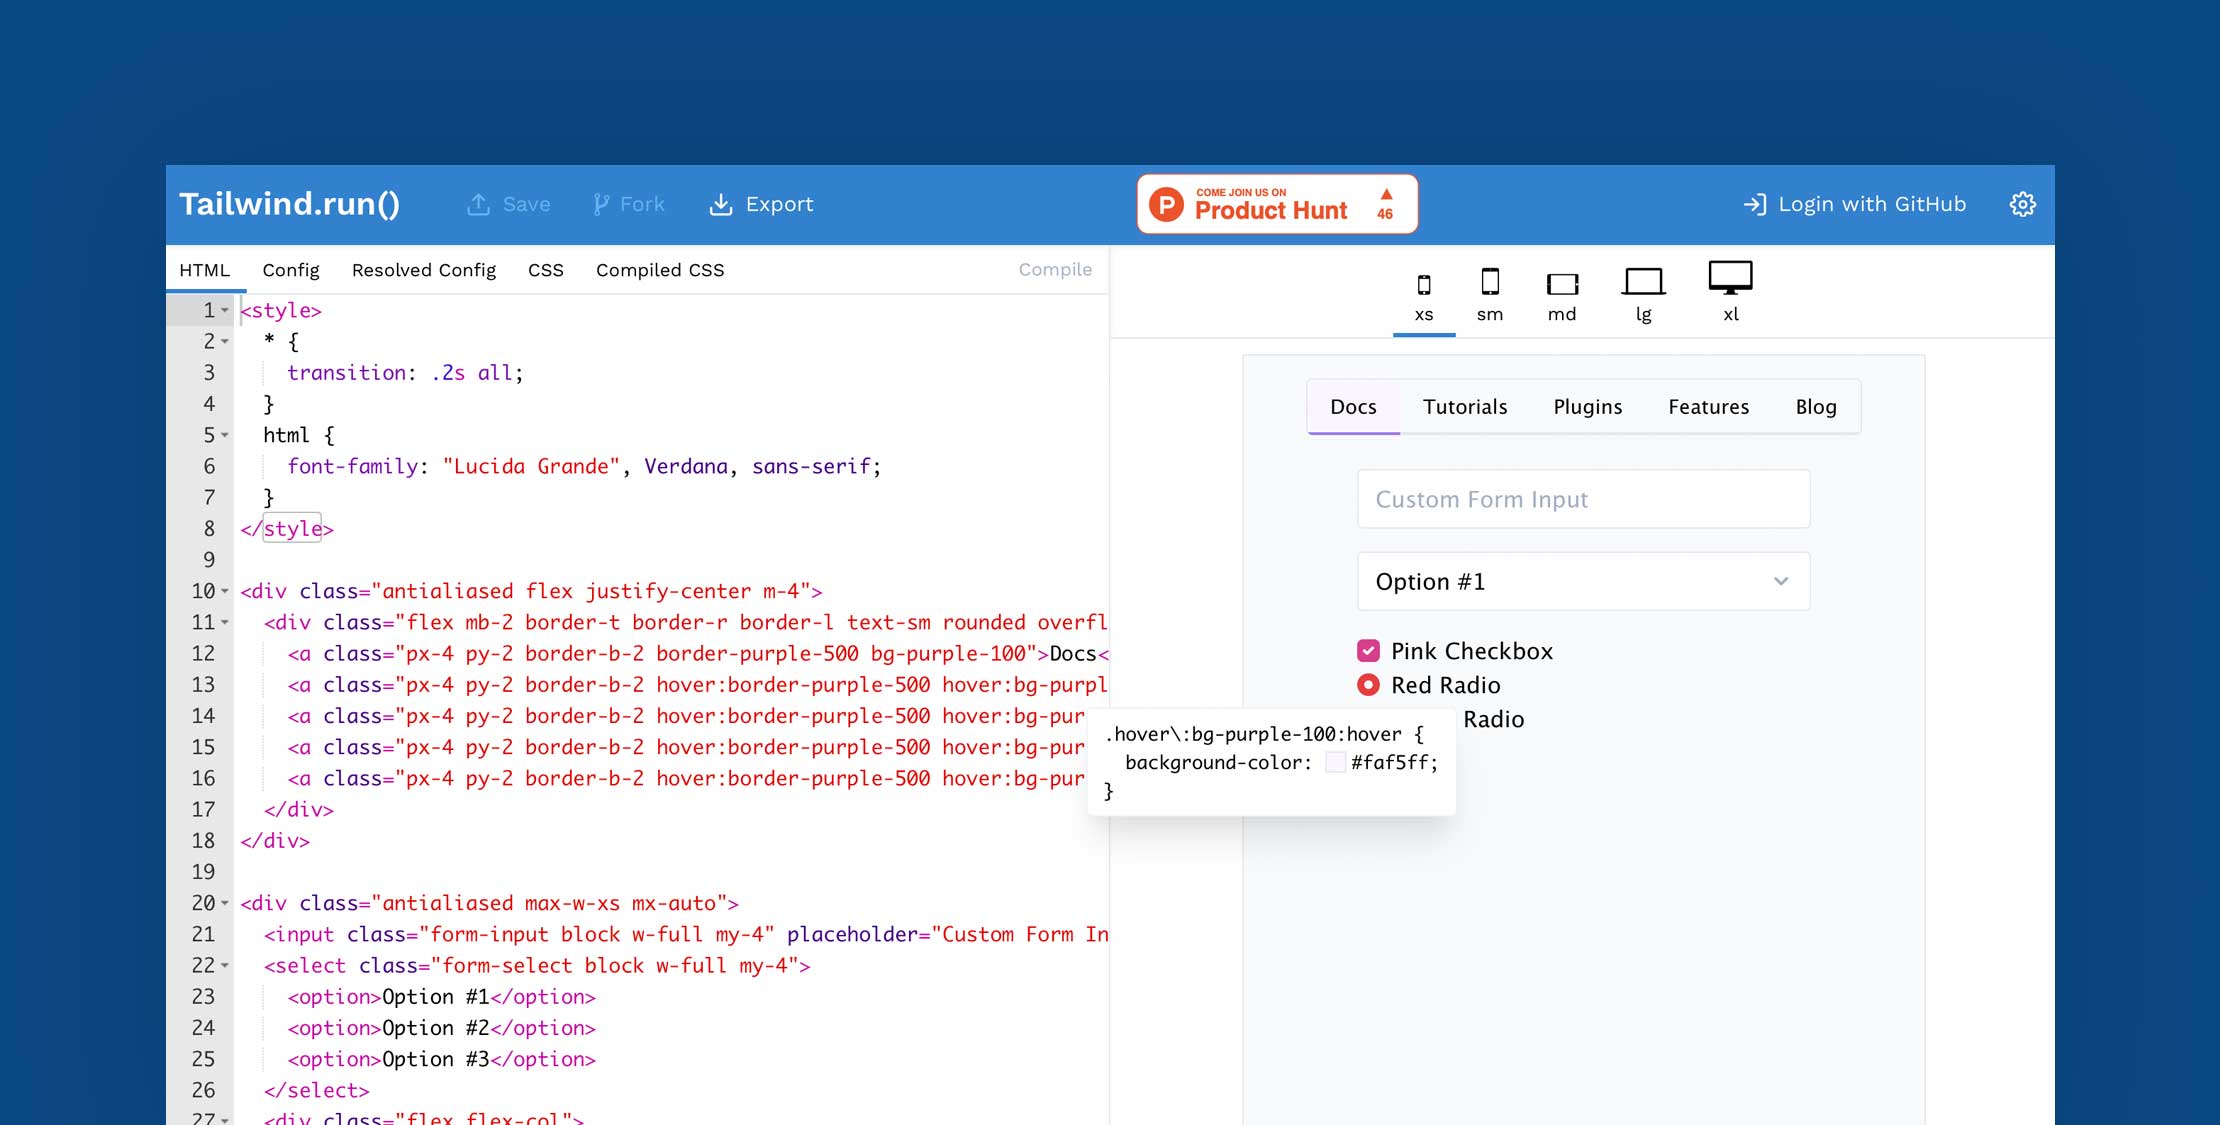 Tailwind.run() Online Code Editor for Tailwind CSS image